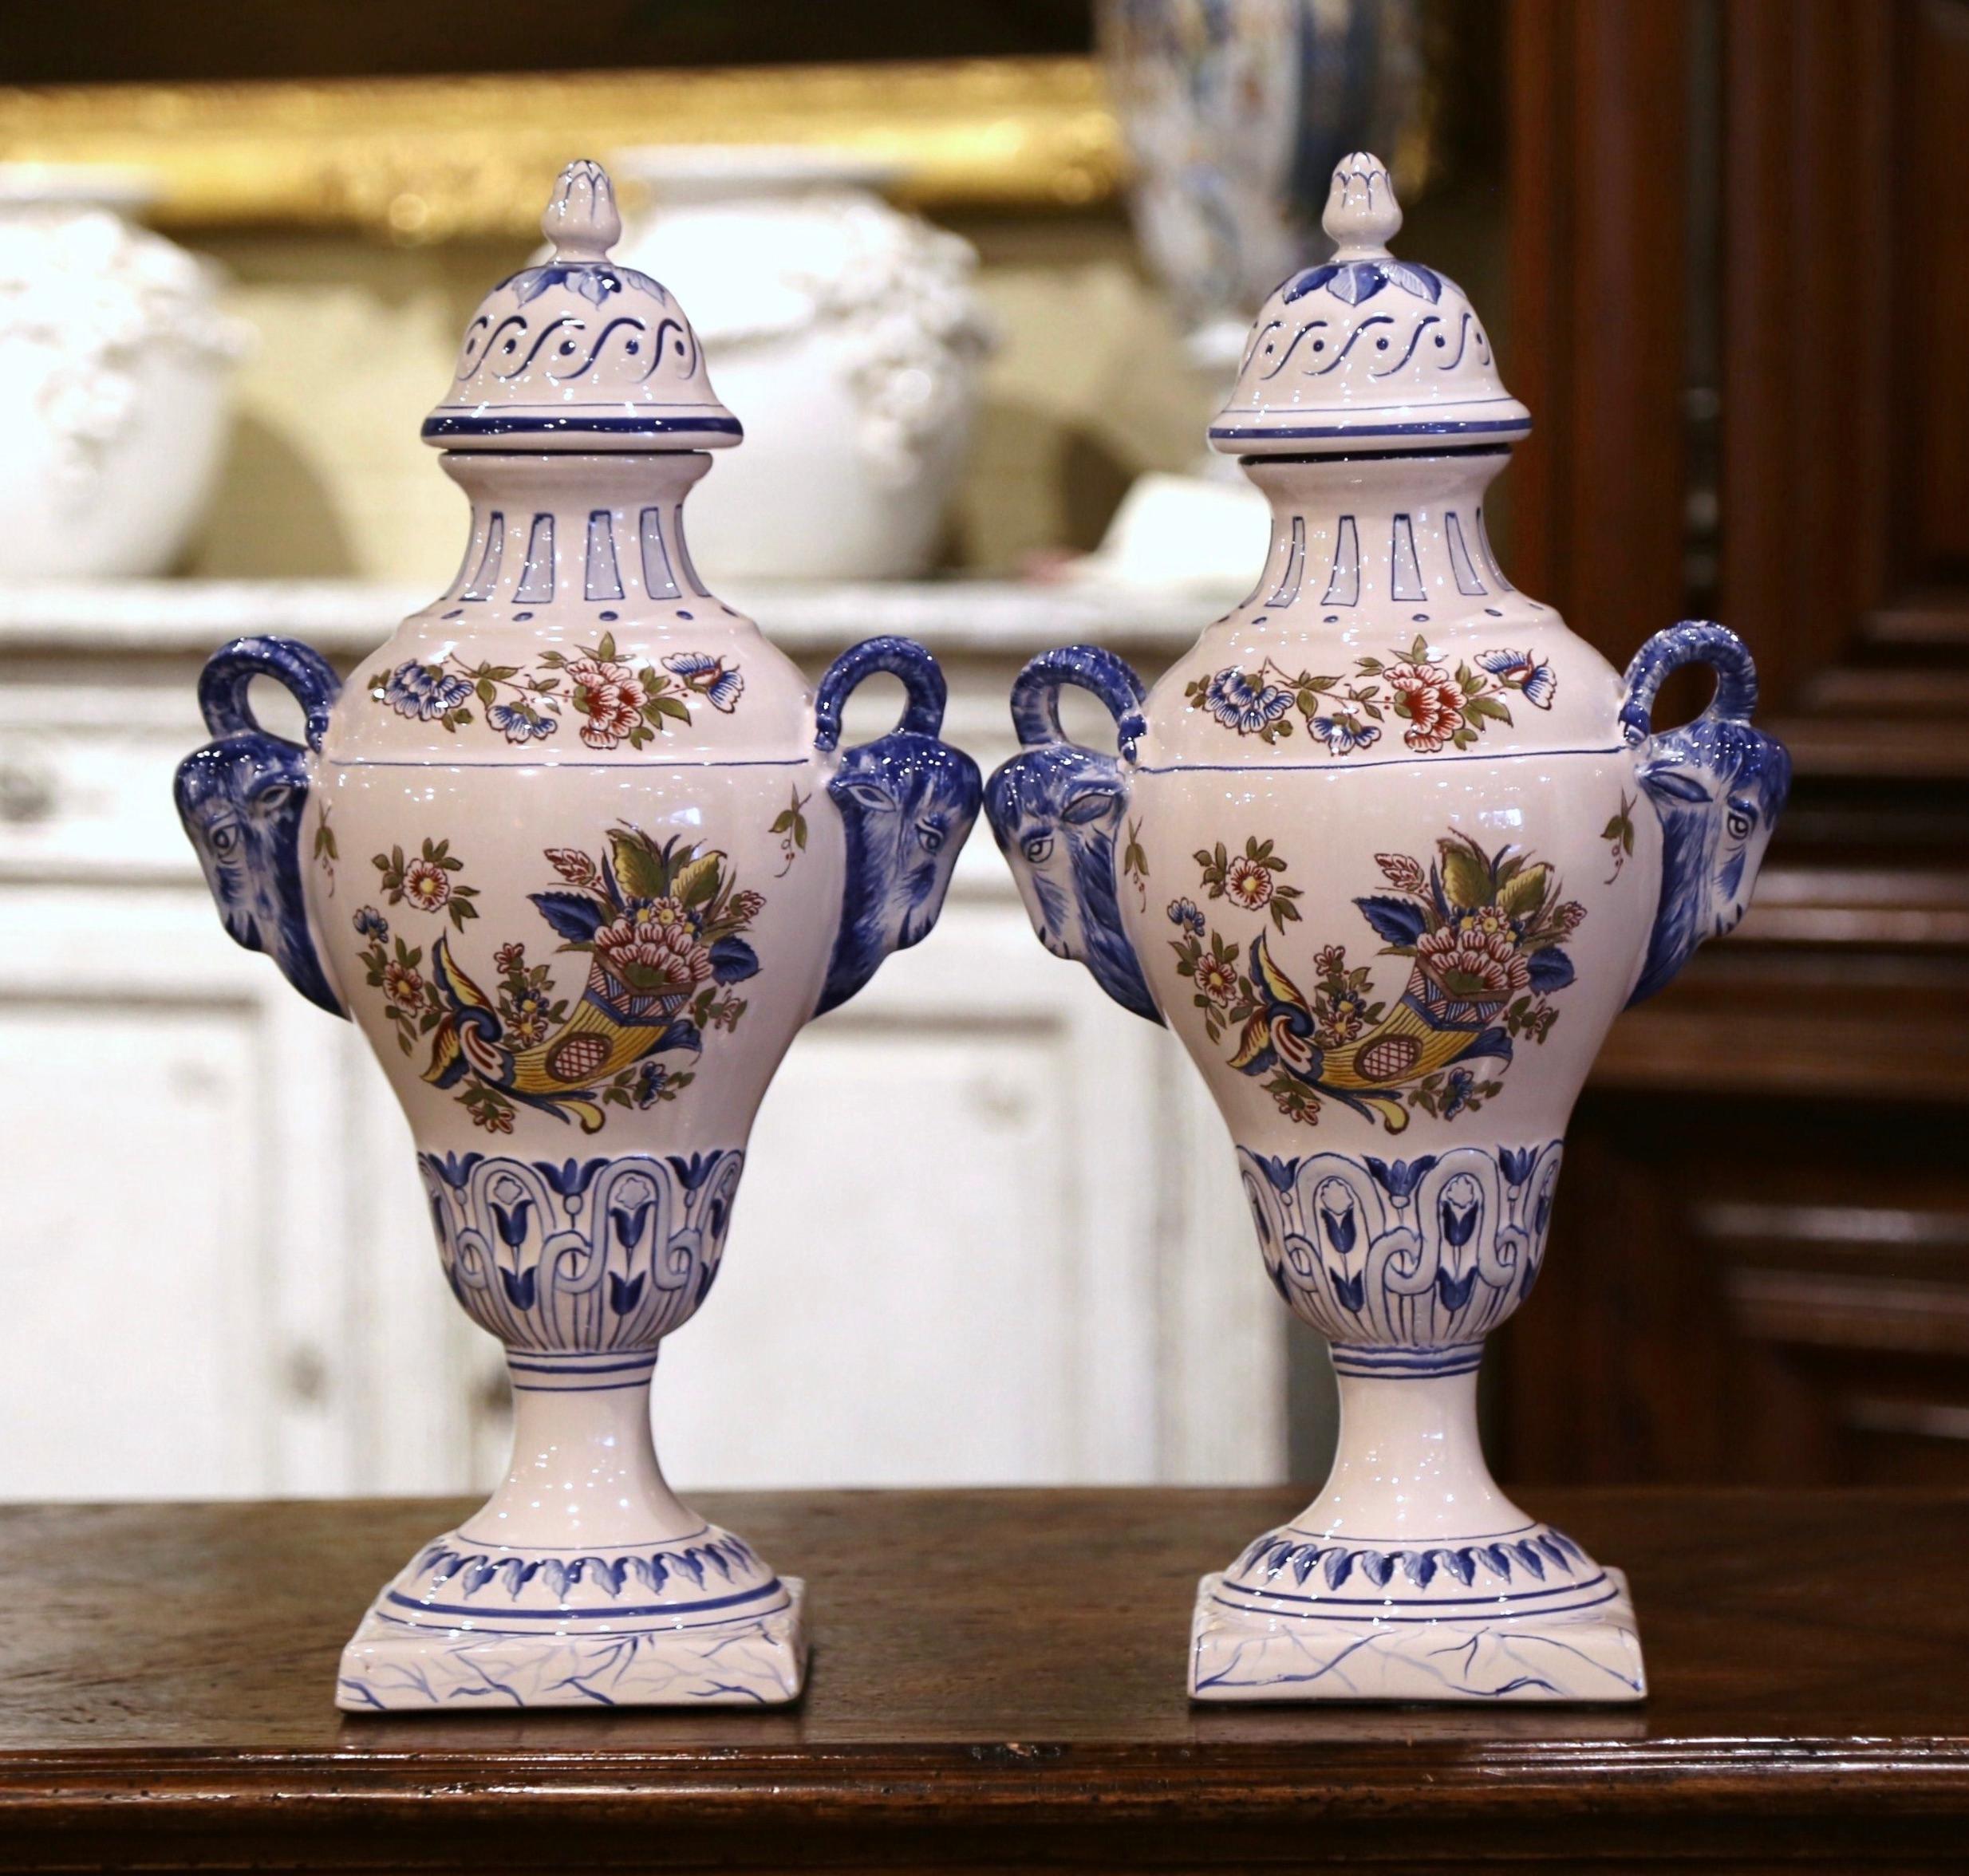 These elegant, antique urns were created in Luneville, France, circa 1970. The tall ceramic vases stand on square bases over a bombe body decorated with ram head handles, and embellished with a cone shape lid. Each colorful piece is hand painted